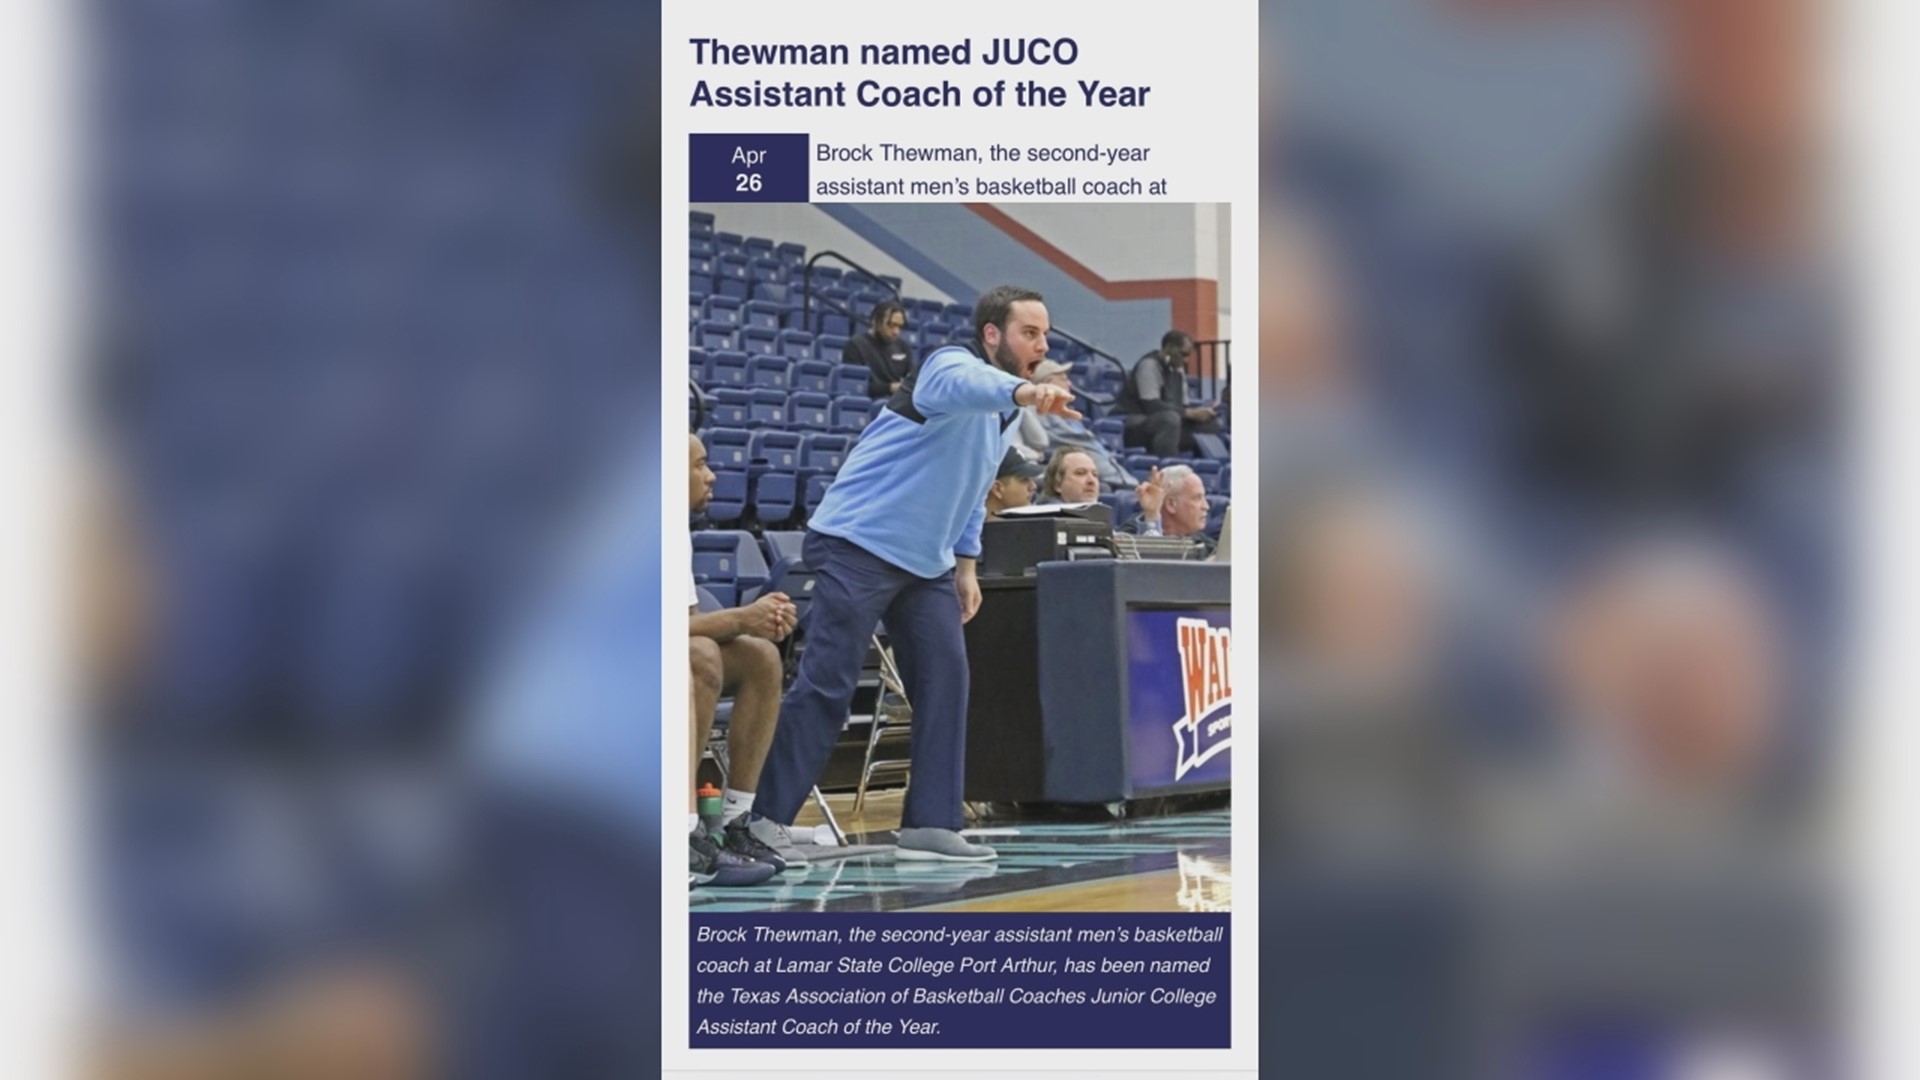 Thewman earns JUCO Assistant of The Year accolades in second season